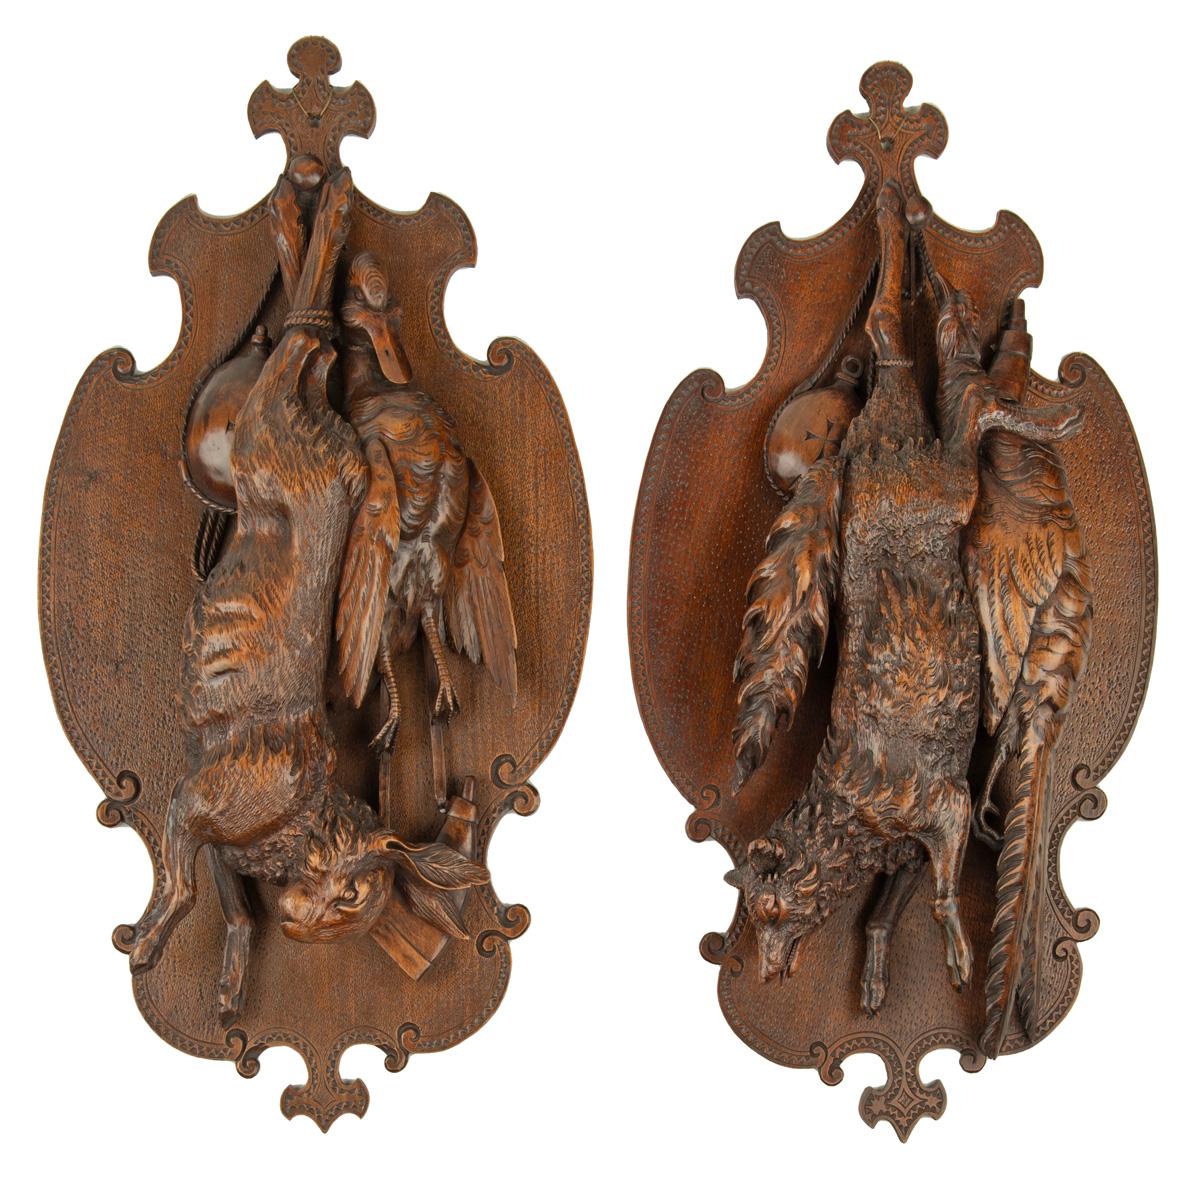 A pair of ‘Black Forest’ game plaques, one carved a fox and a pheasant, the other with a hare and duck.  Swiss, circa 1880.

According to Arenski, Daniels and Daniels, Swiss Carvings ‘The Art of the Black Forest’, 1820-1940, London 2004, pages 44,